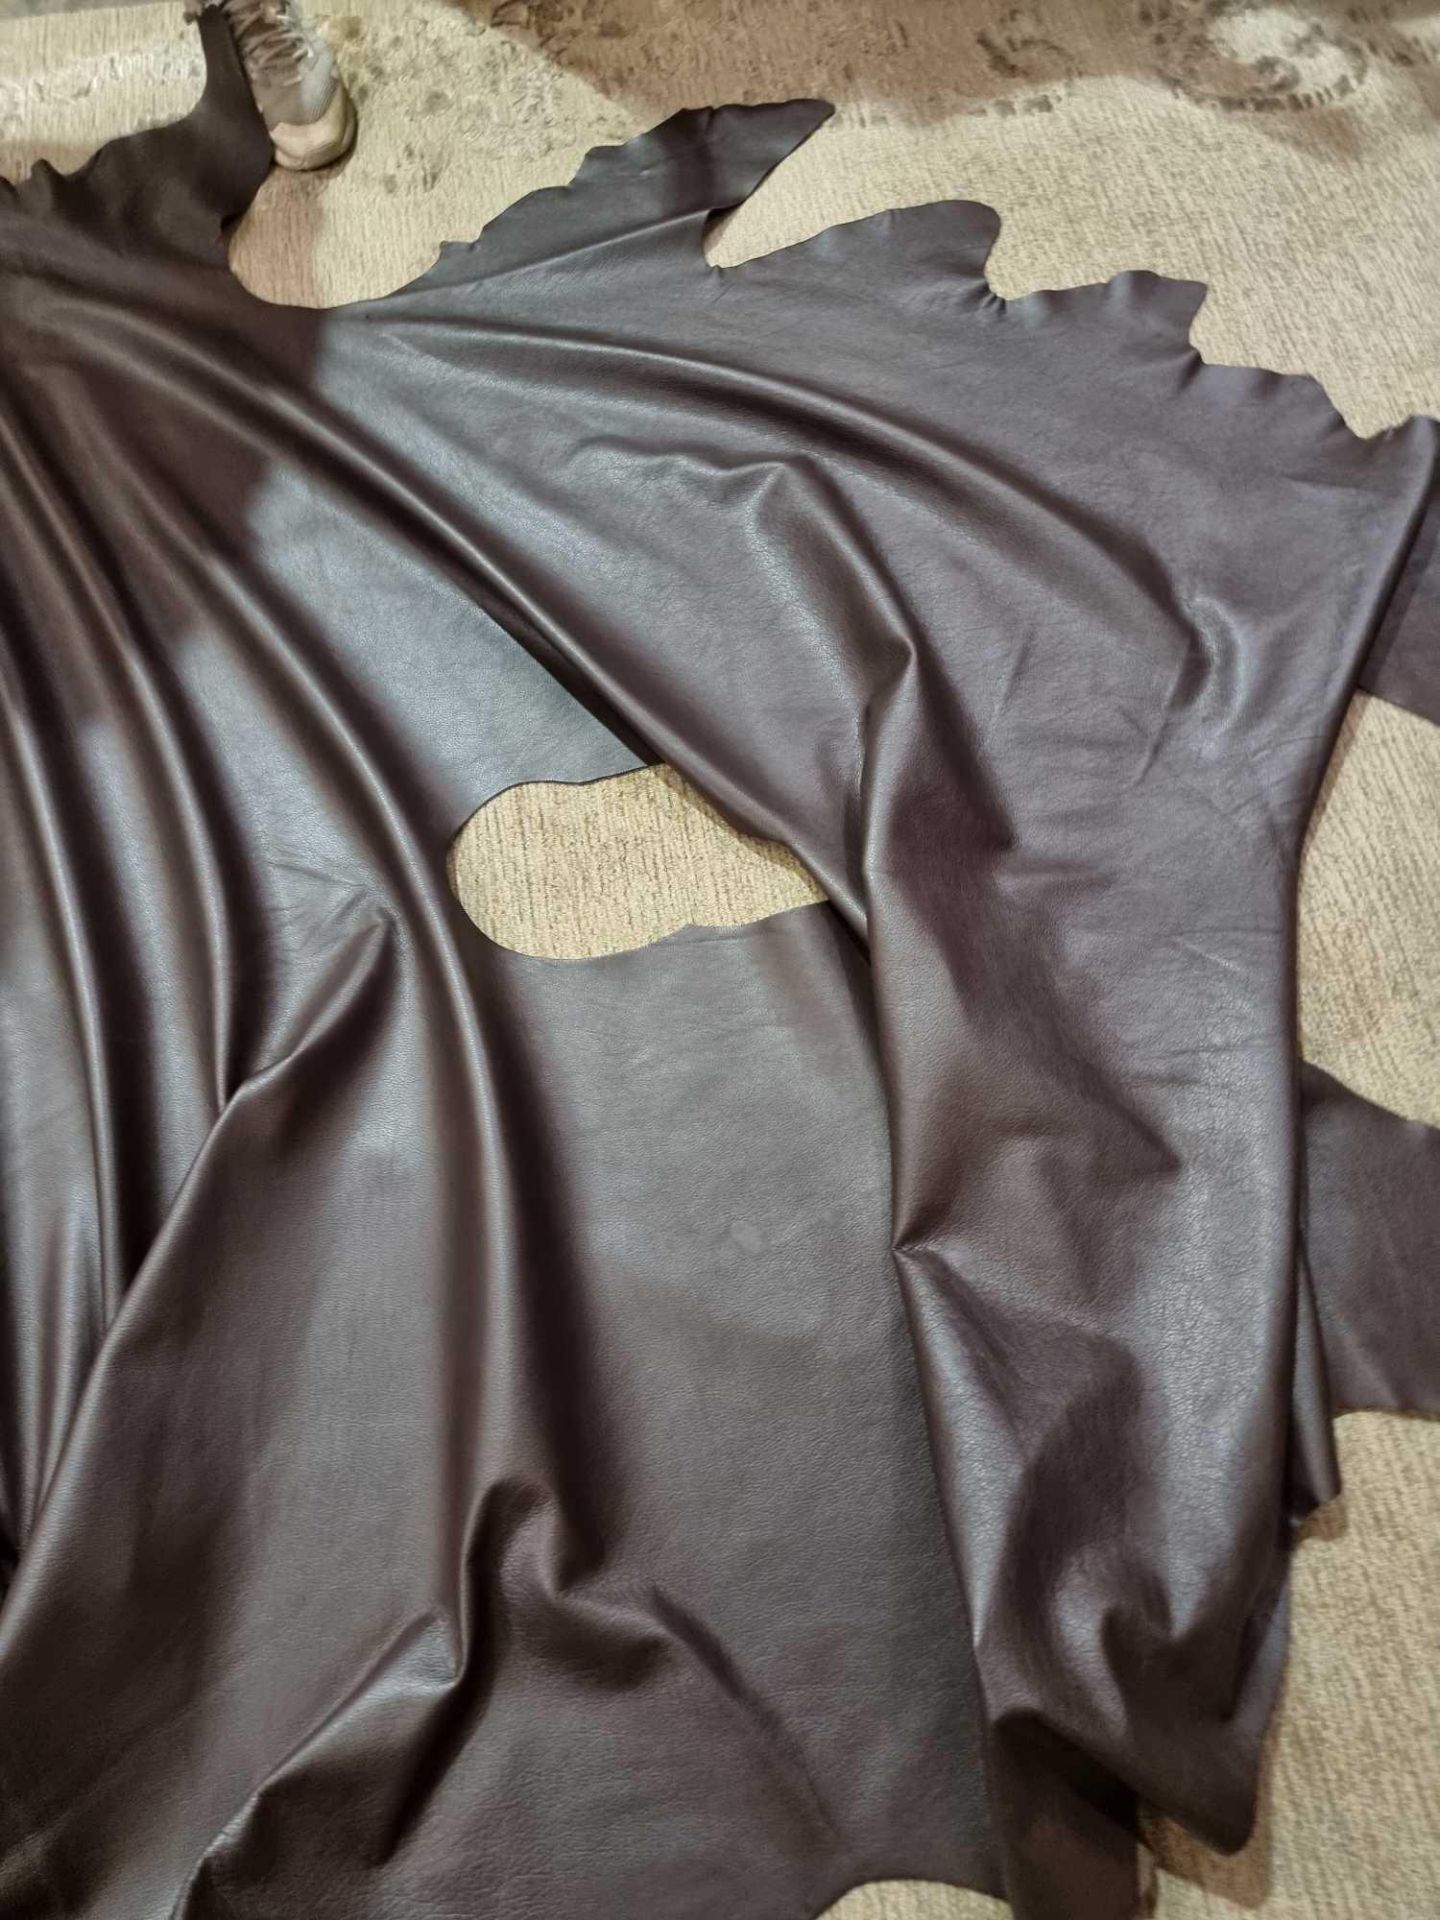 Mastrotto Hudson Chocolate Leather Hide approximately 4.75mÂ² 2.5 x 1.9cm - Image 3 of 3